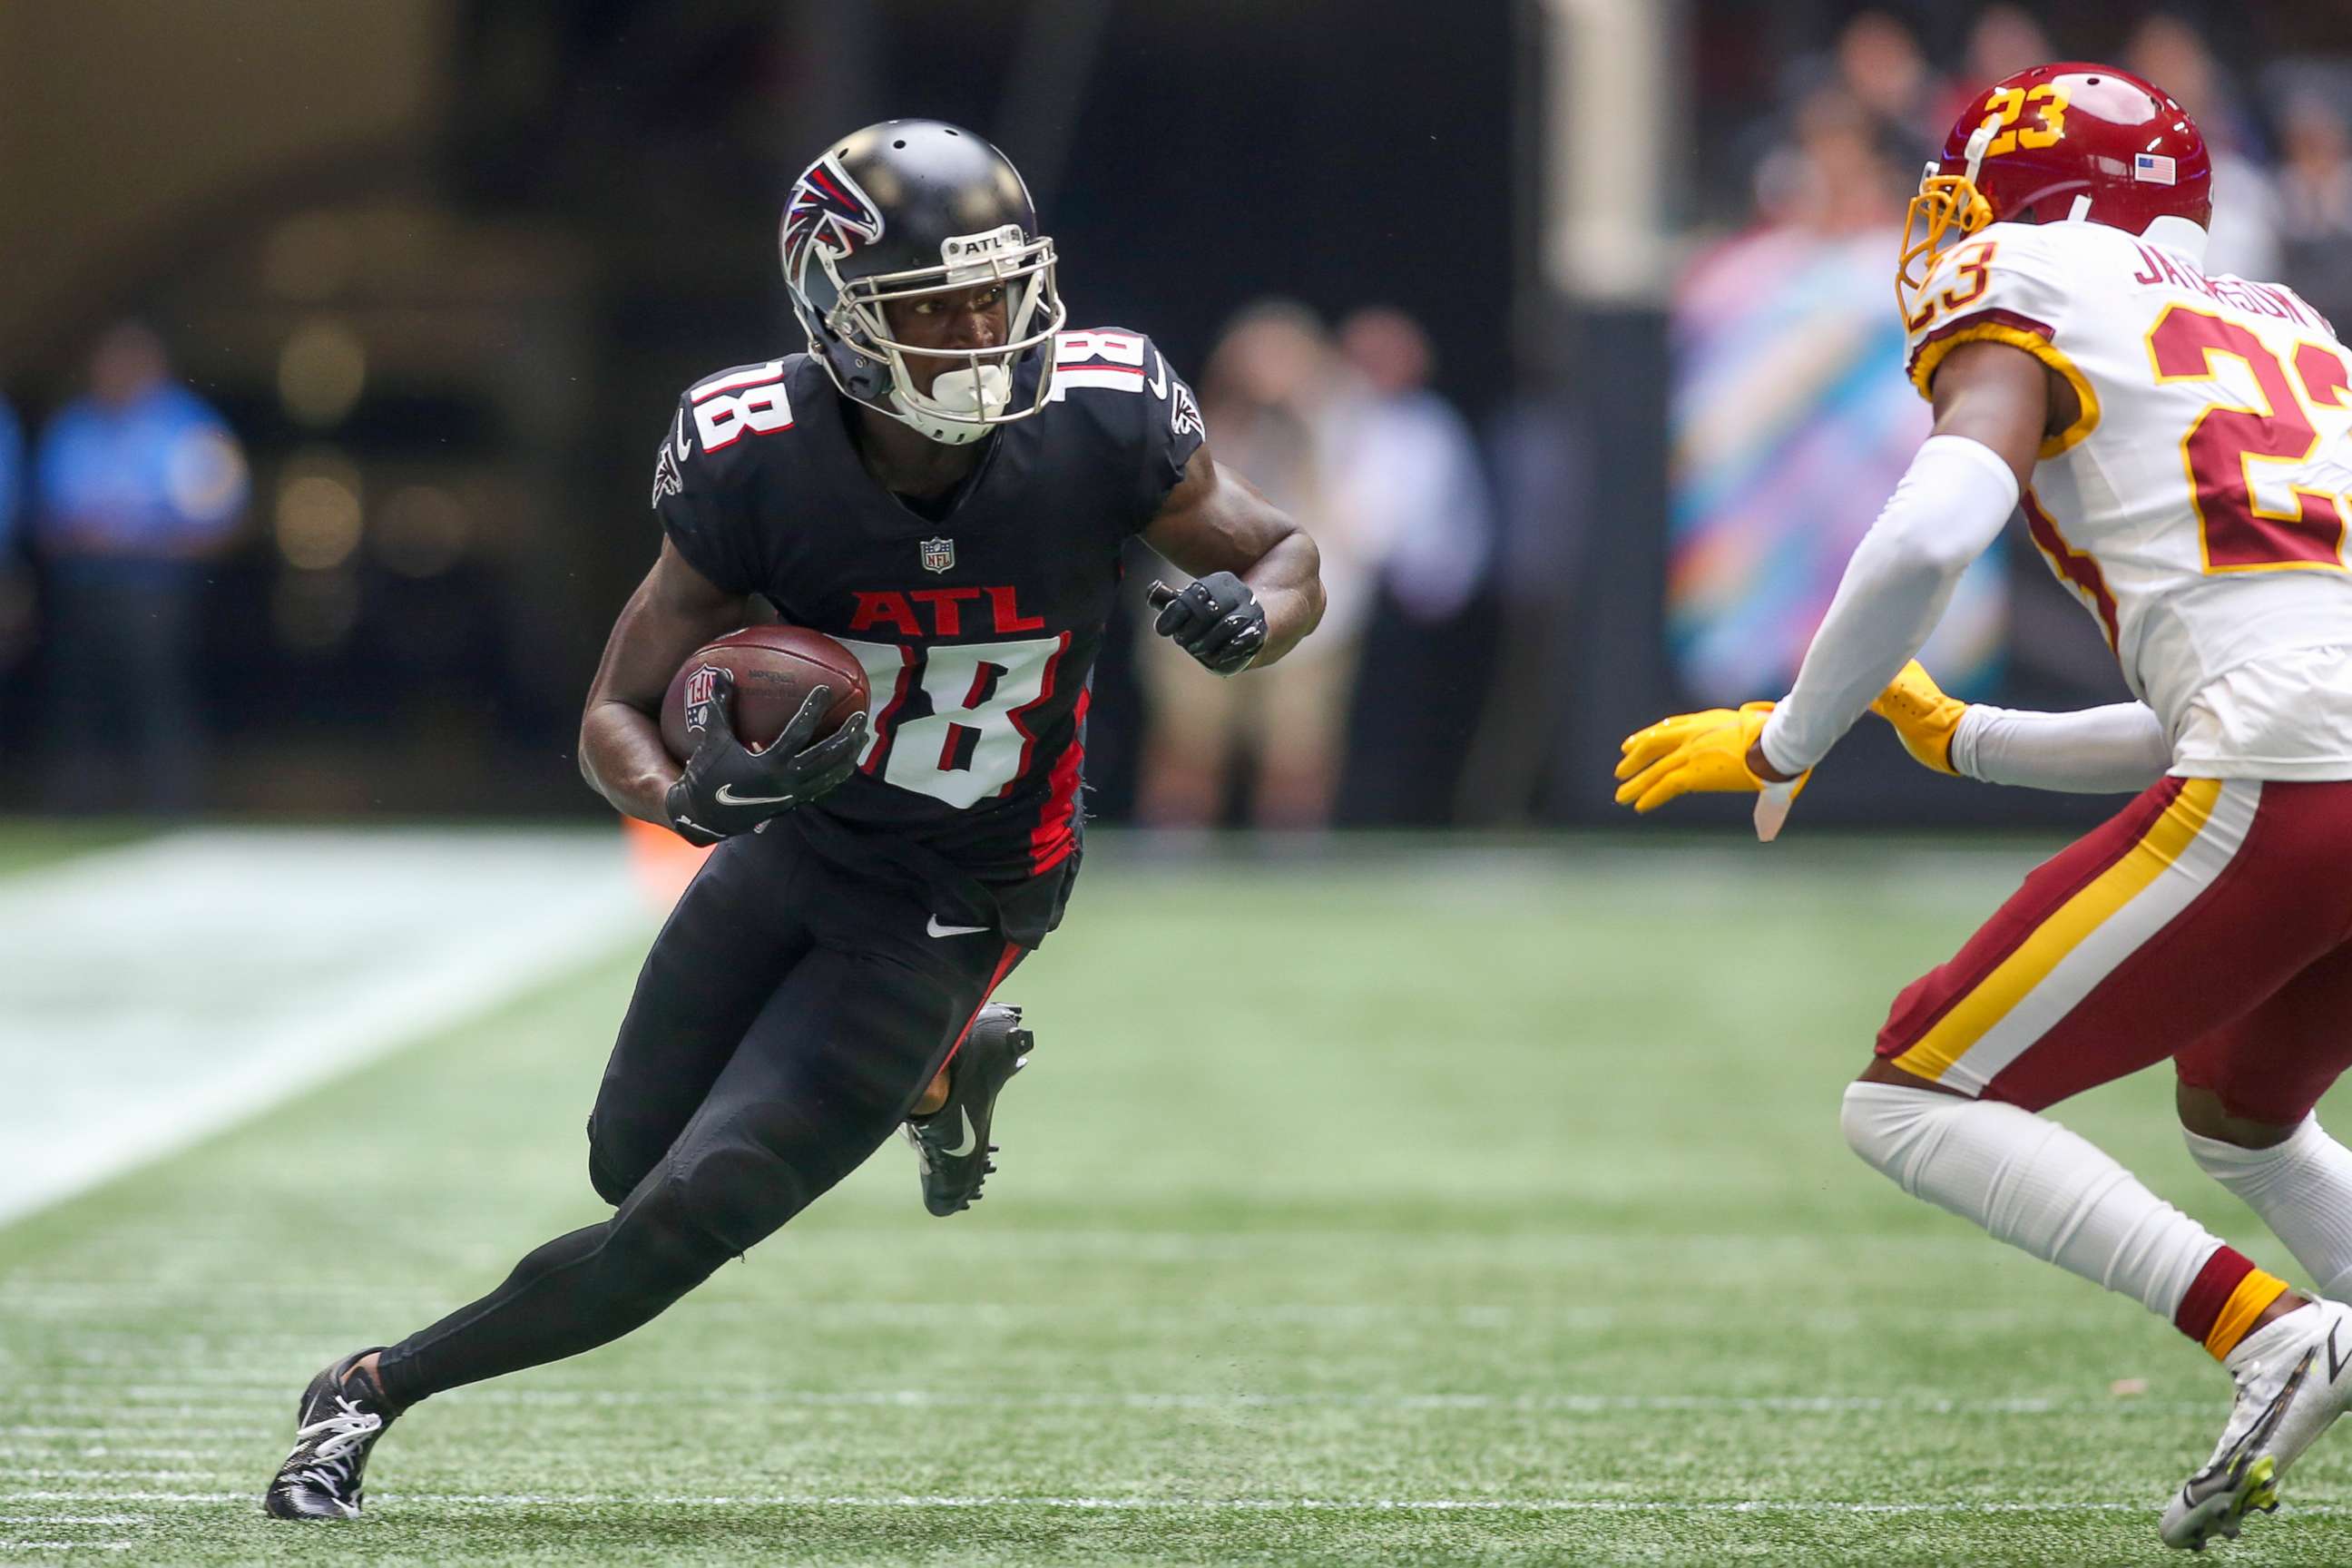 PHOTO: Atlanta Falcons wide receiver Calvin Ridley runs with the ball after a catch against the Washington Football Team, Oct. 3, 2021, in Atlanta.